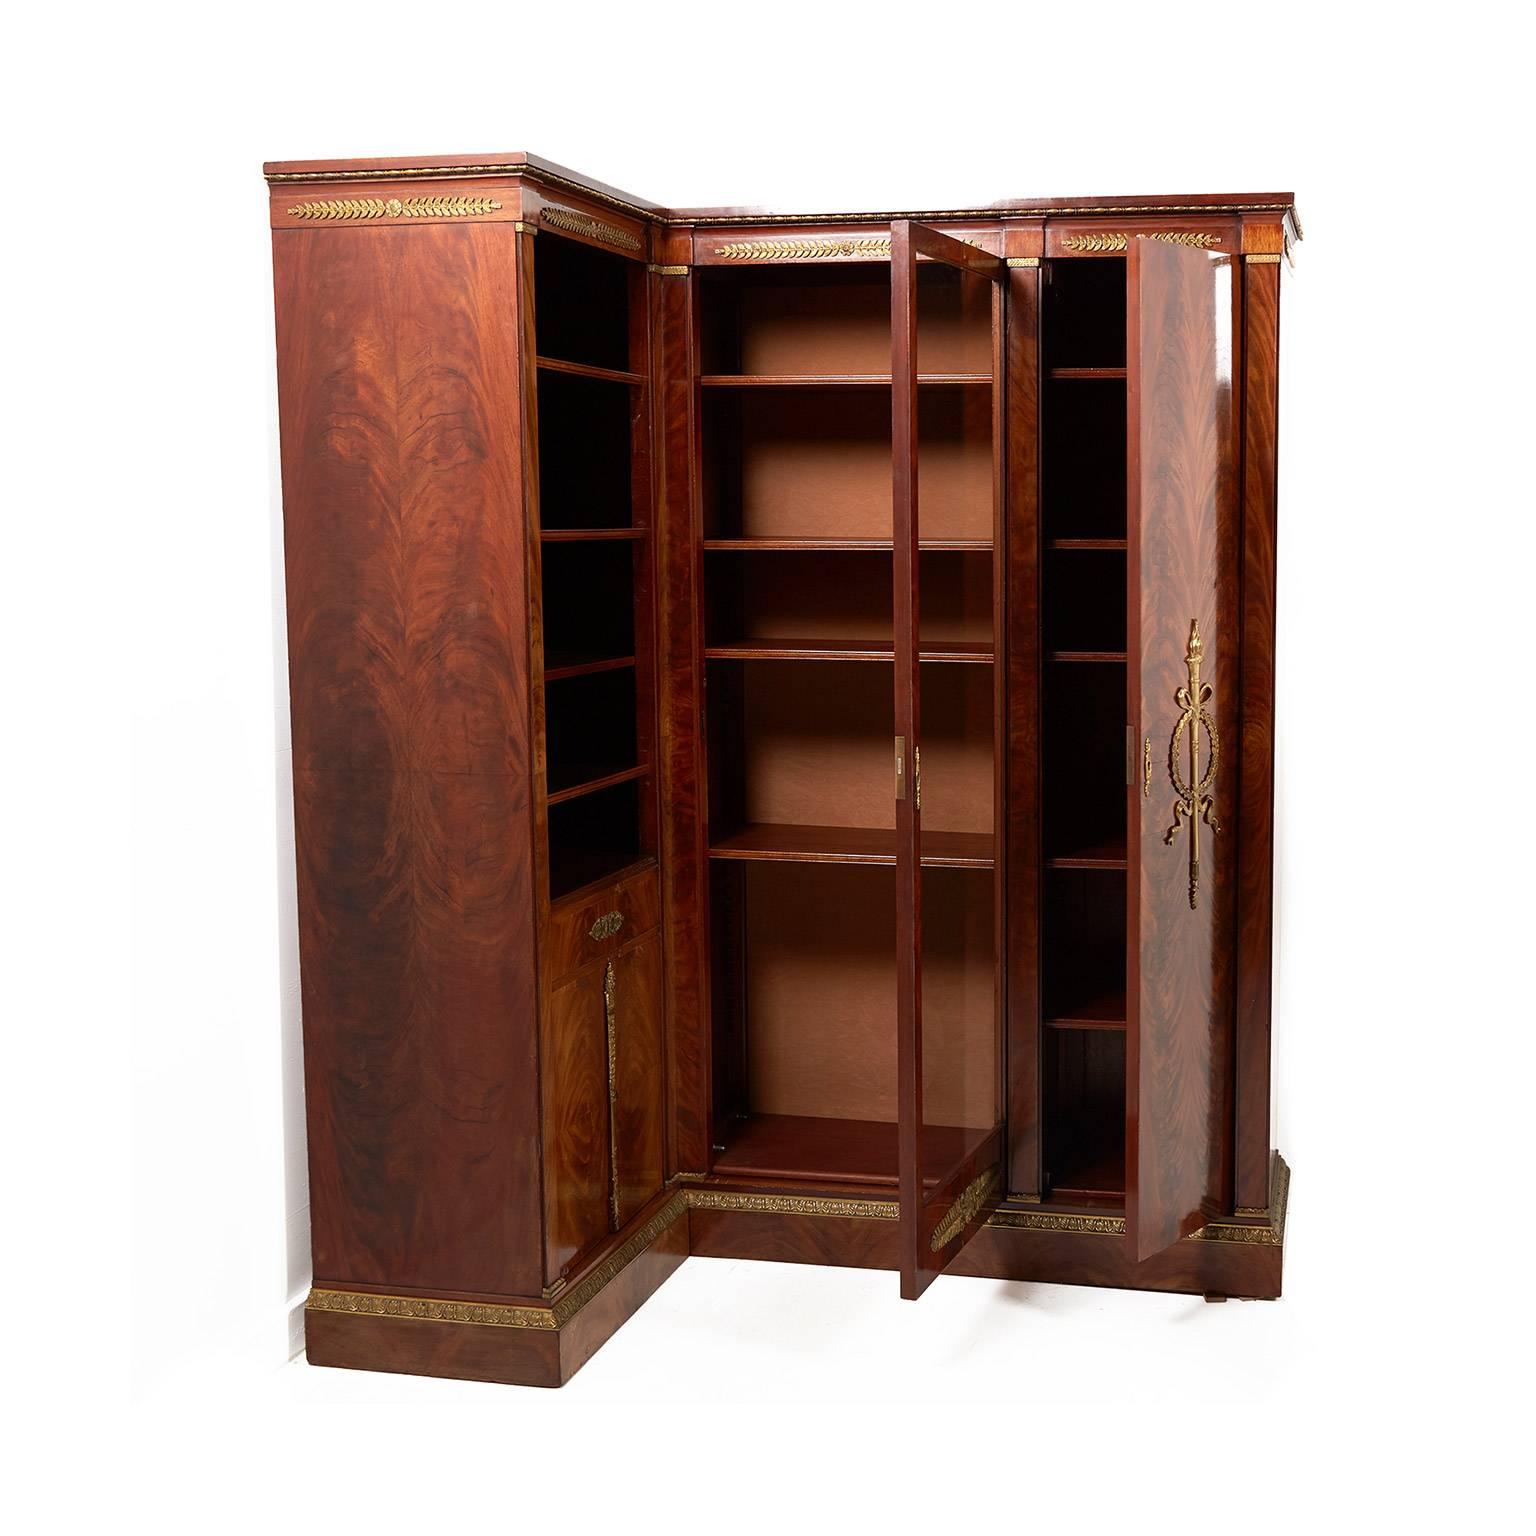 French Mahogany Empire-revival corner cabinet with gilt bronze mounts and striking accents, circa 1910. With glass doors and finished shelves, this is a beautiful and unusual corner piece. Plenty of storage, too.


           